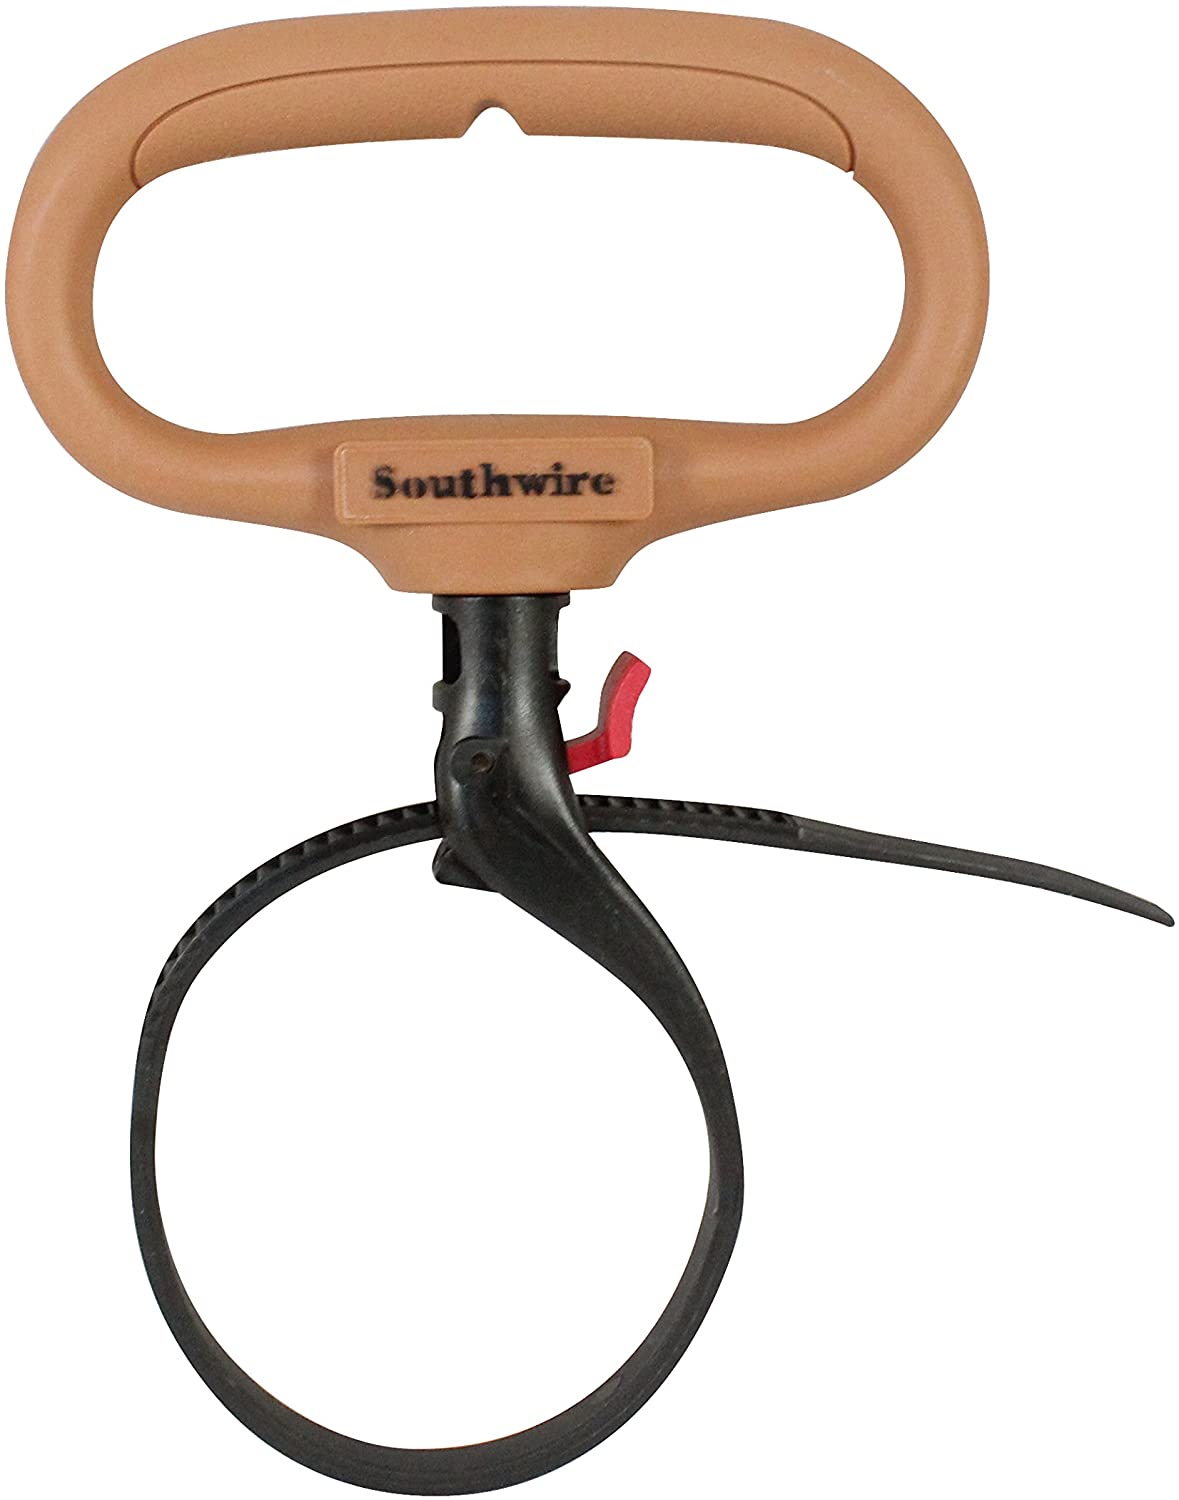 Southwire CLPT02 2-Inch Adjustable Heavy Duty Clamp Tie w/ Rotating Handle, Reusable Zip Down Cable, Brown - $2.63 - FS w/ Prime